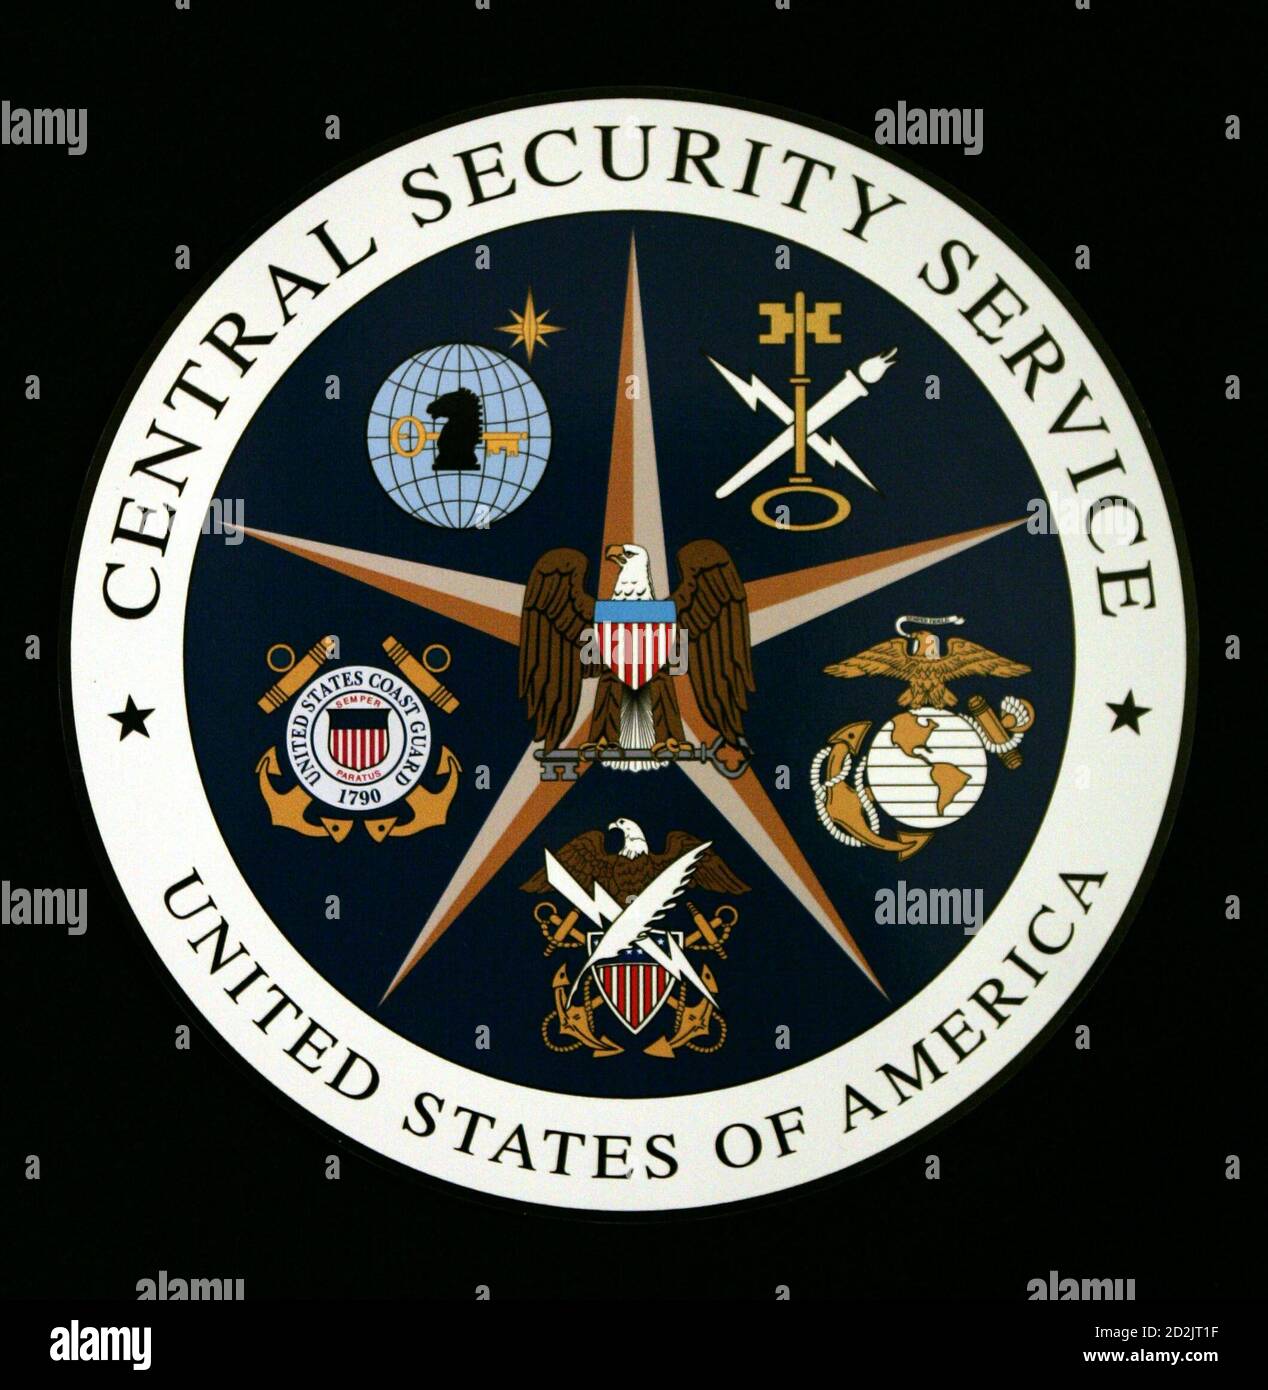 The Seal Of The Us Central Security Service Is Shown At The National Security Agency In Fort 7193